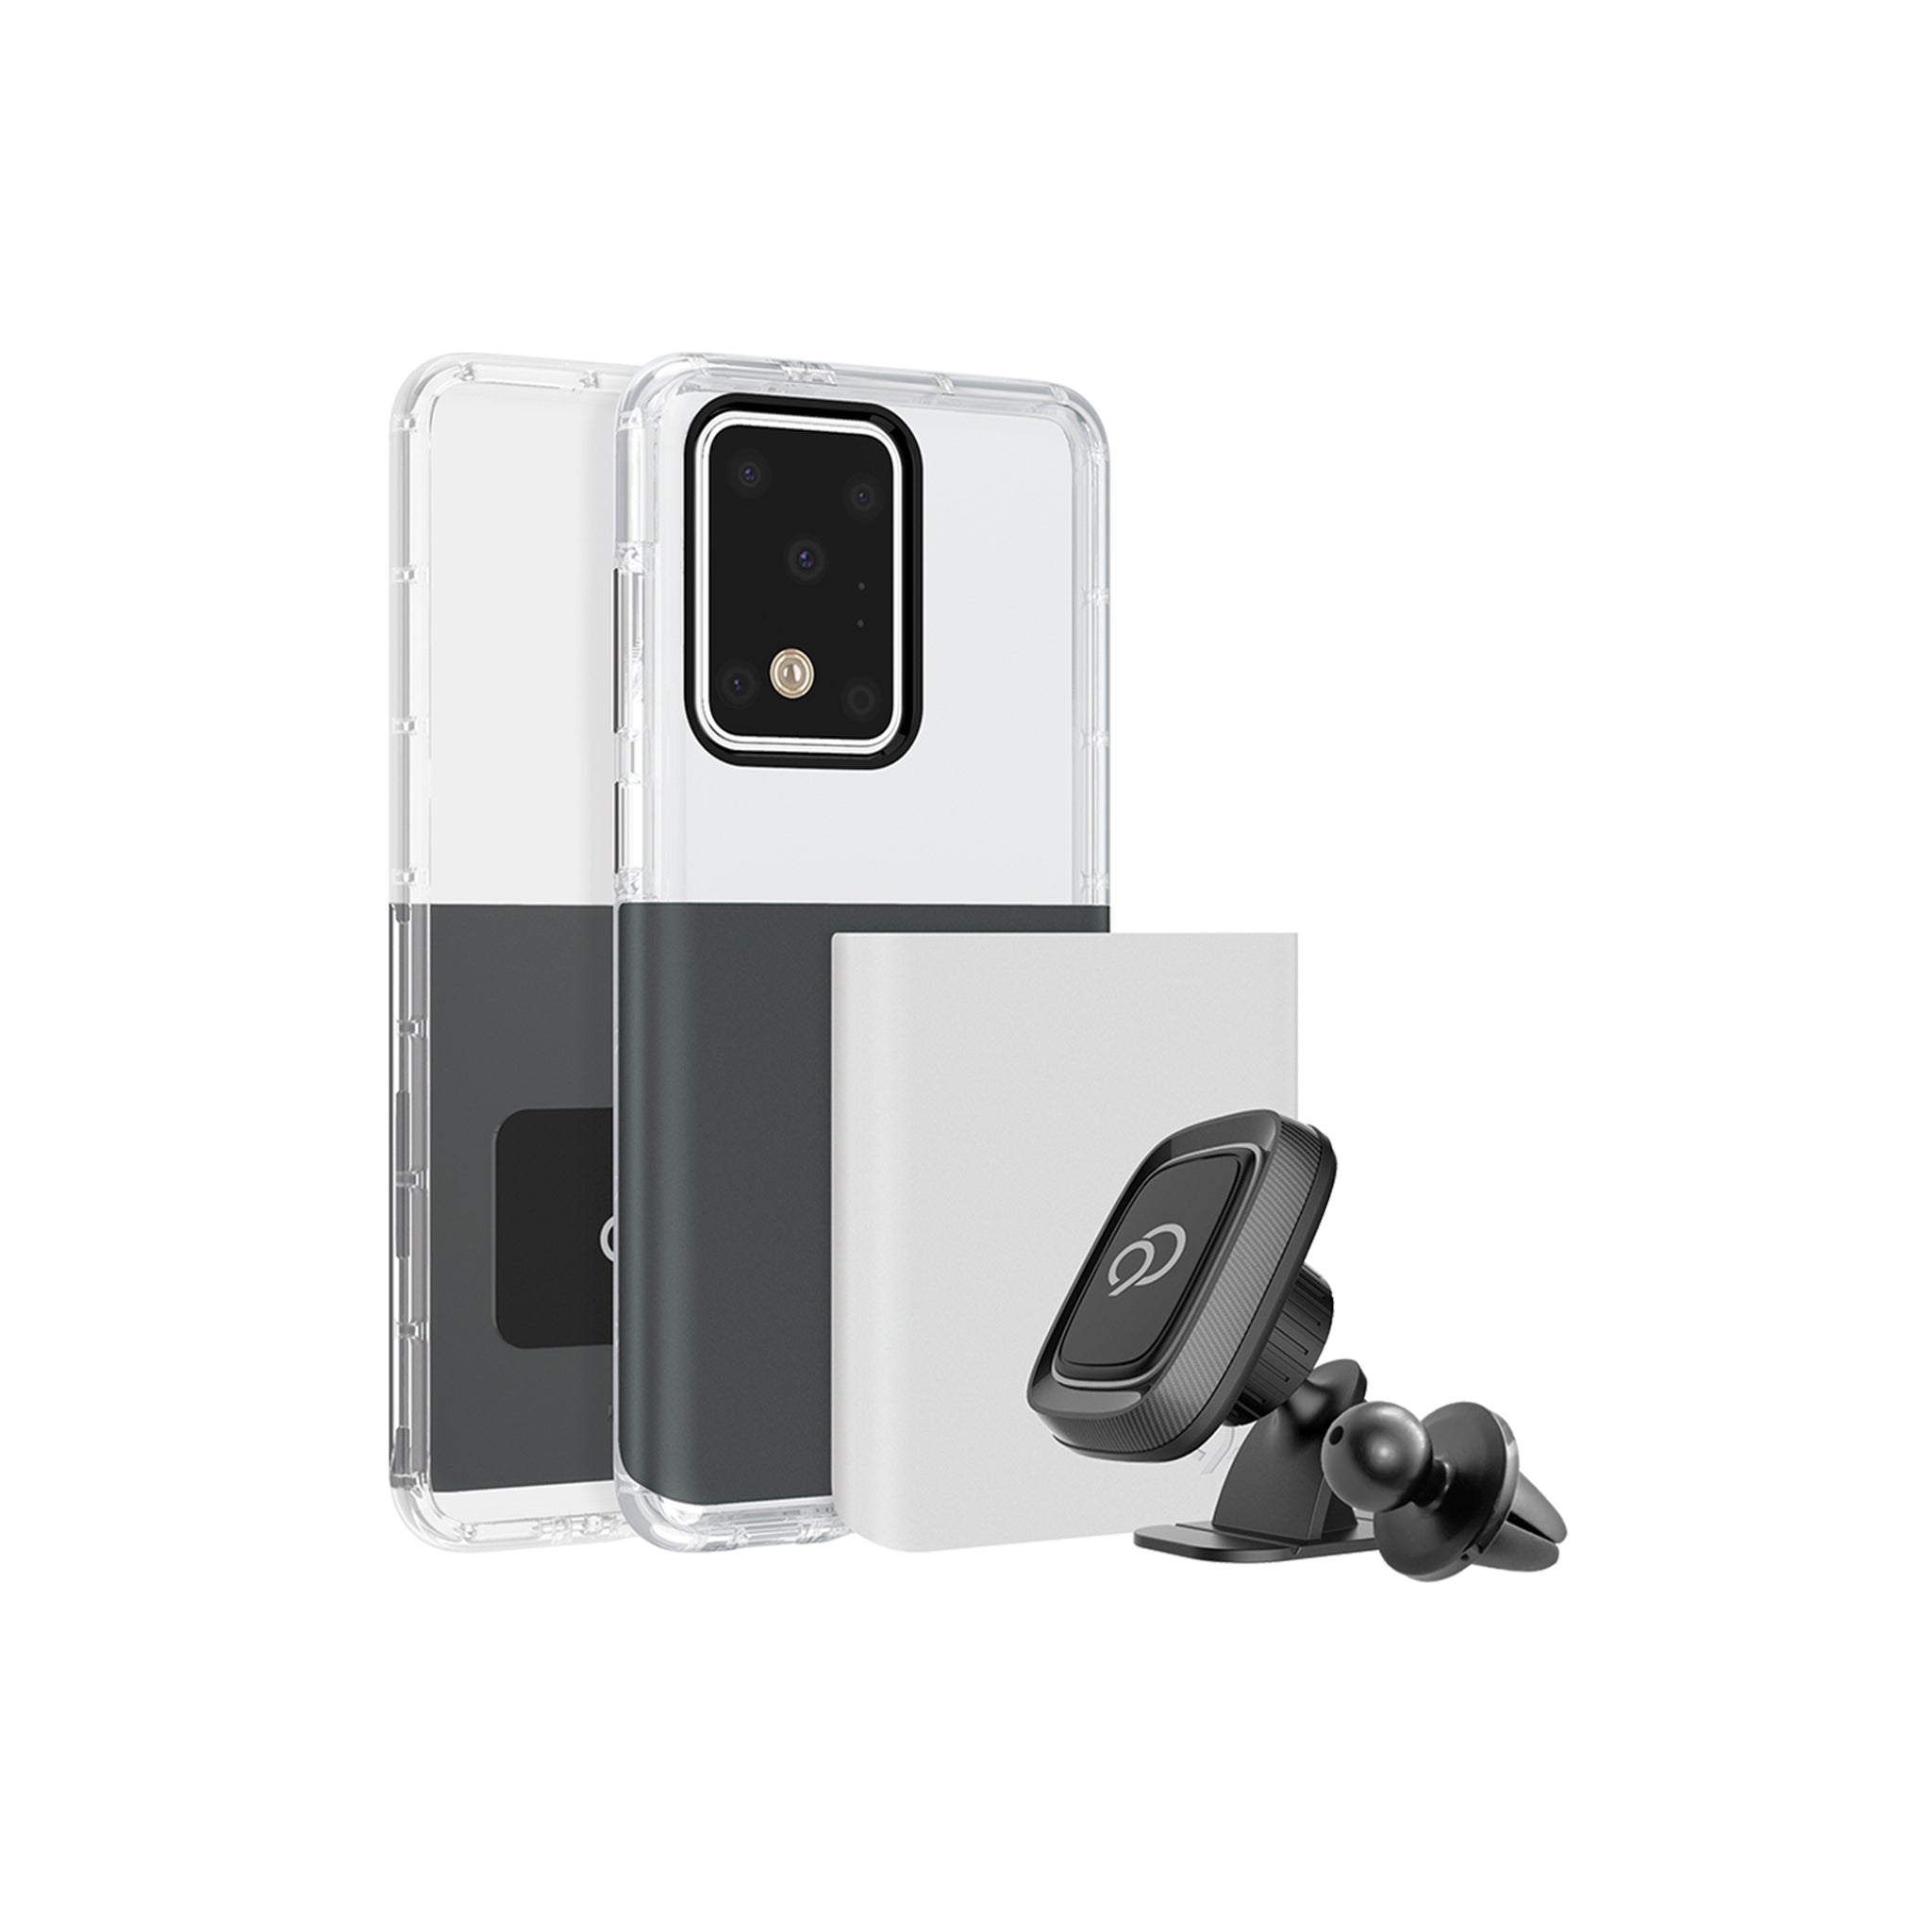 Nimbus9 - Ghost 2 Pro Case With Mount For Samsung Galaxy S20 Ultra - Gunmetal Gray And Pure White